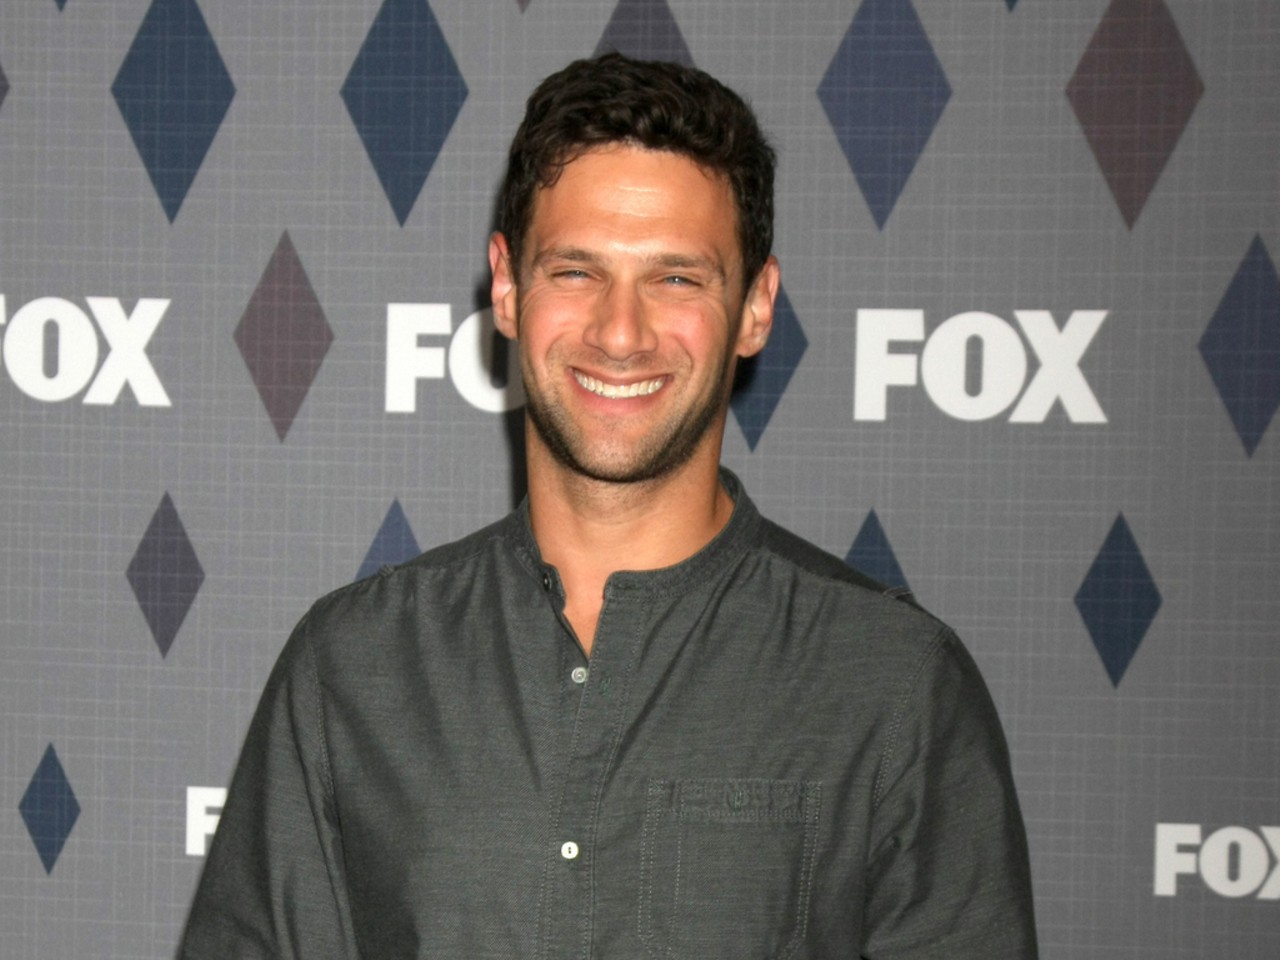 Justin Bartha | I Just Stole the Declaration DILF
Whether Justin is helping Nicolas Cage steal the Declaration of Independence, or working as a producer and director behind the camera, Justin knows big responsibilities. In 2014, he and his wife Lia Smith had a baby girl. Despite being in all of the Hangover movies, one thing&#146;s for sure &#151; Justin cares about his family. 
Kathy Hutchins / Shutterstock 